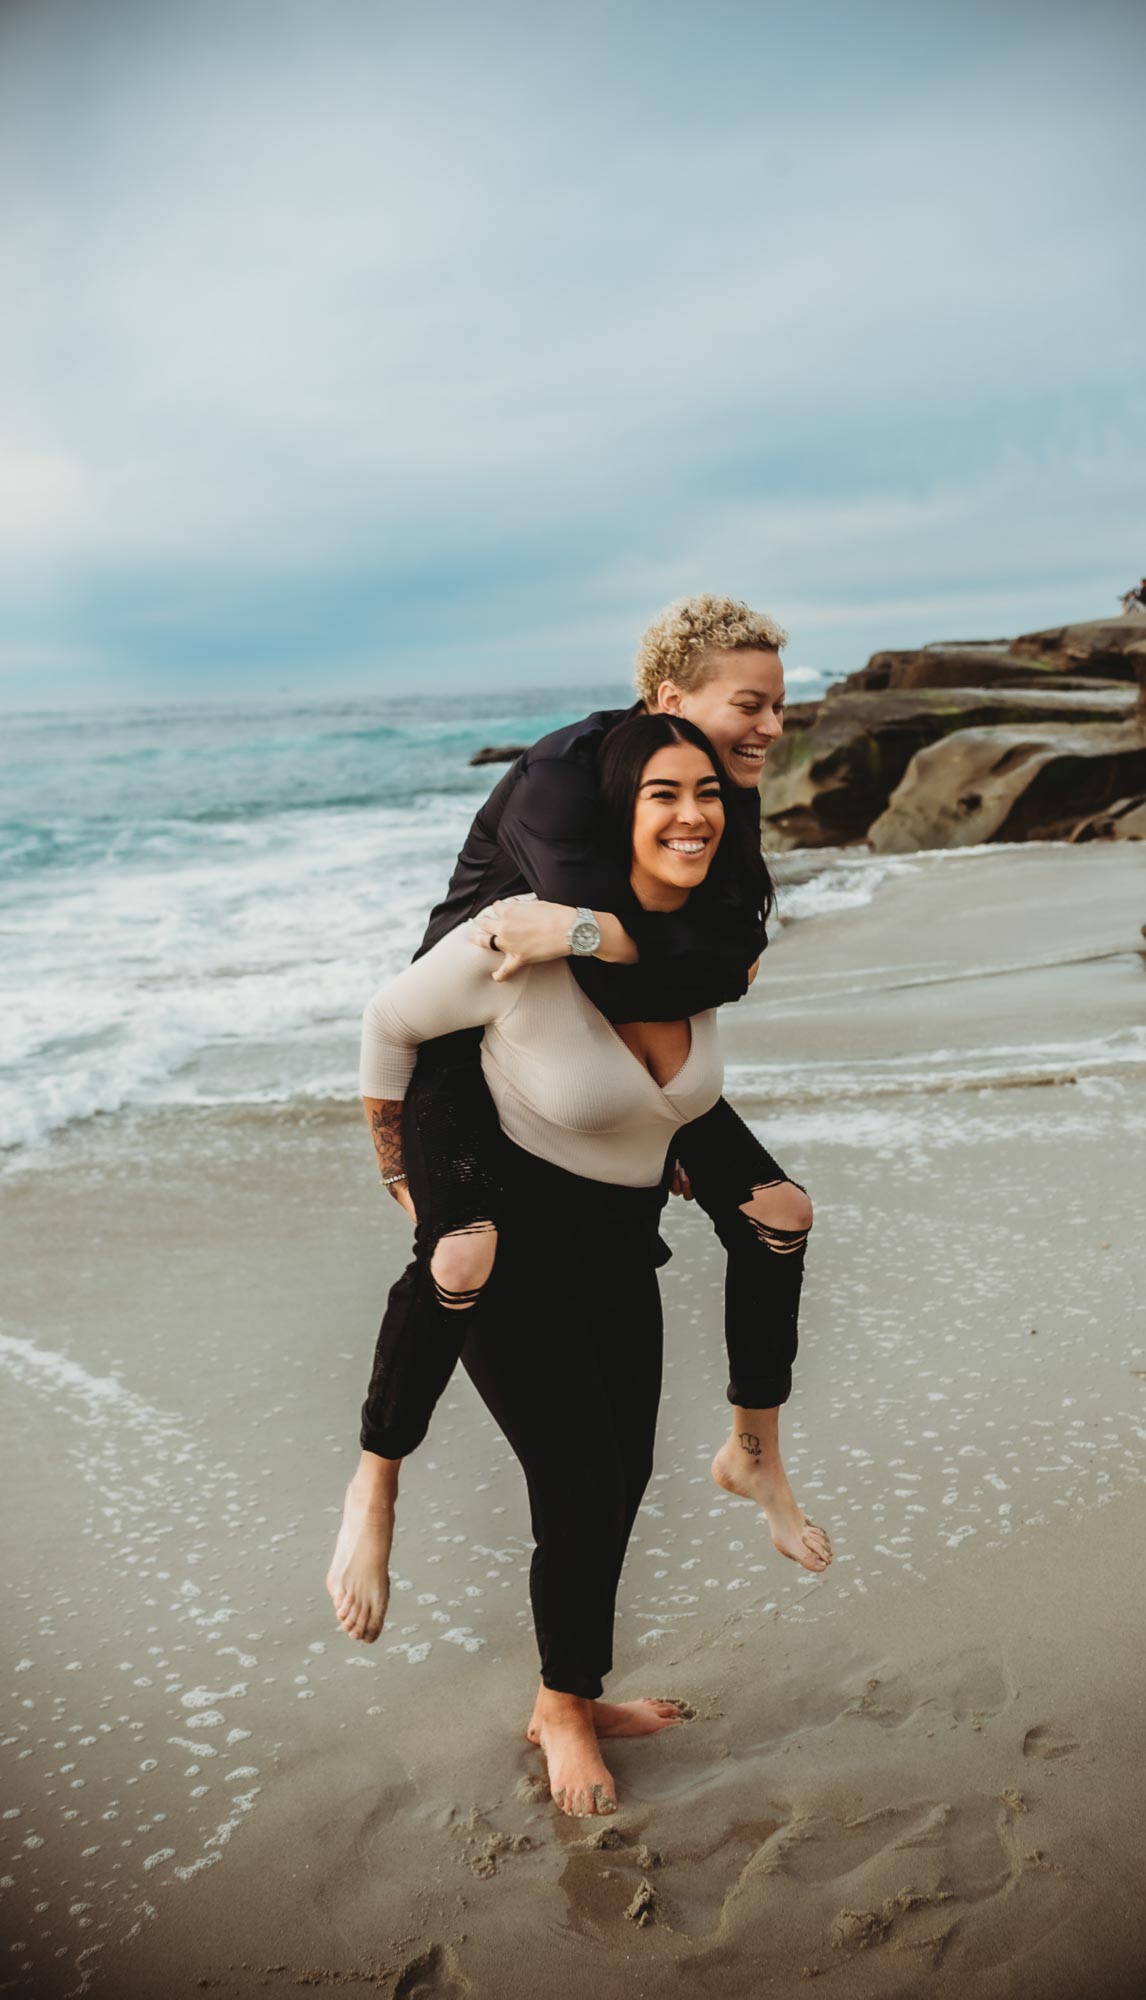 Romantic beach photo shoot to celebrate whirlwind engagement and wedding | Brittany V Photography | Featured on Equally Wed, the leading LGBTQ+ wedding magazine